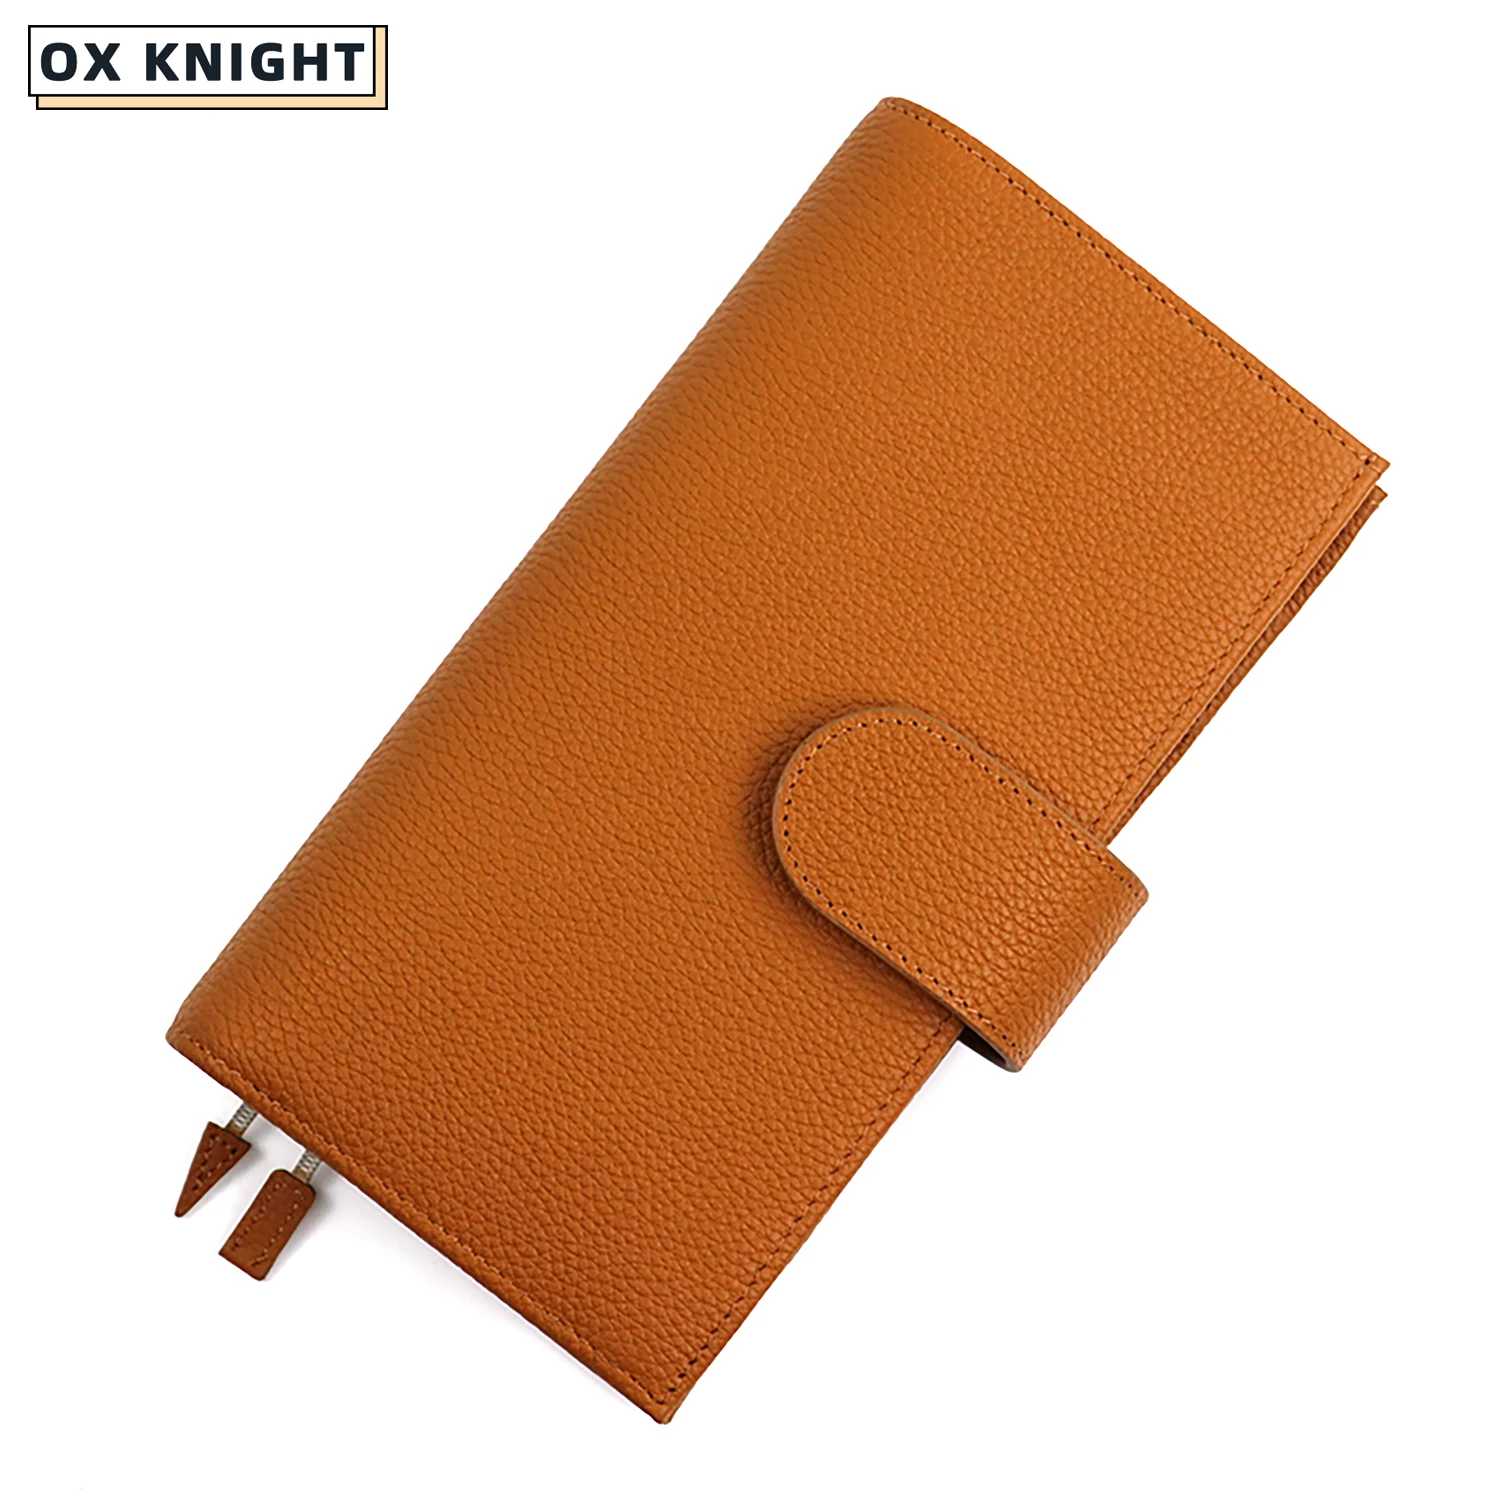 OX KNIGHT[Free Shipping]Travel Journal Standard Size Notebook With Back Pocket and Double Clasps Notebook Diary Planner Oganizer